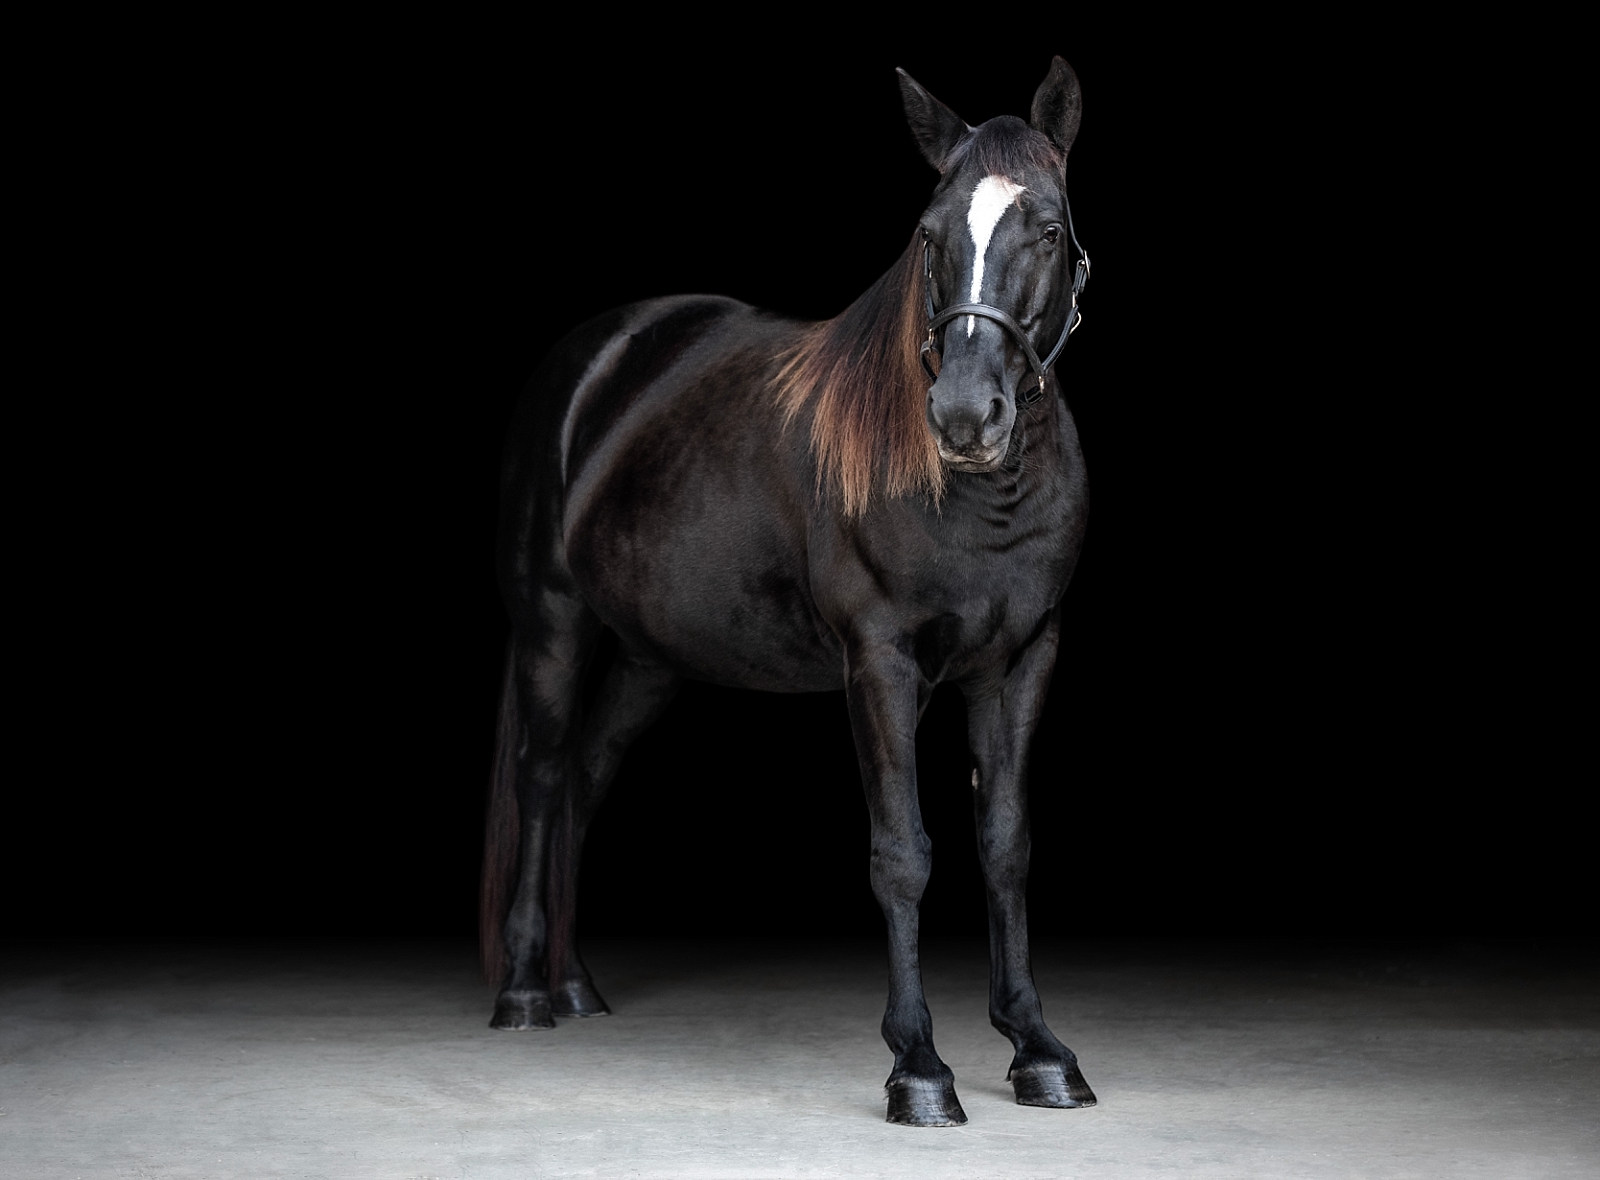 Black Tennessee Walking Horse mare photographed in South Georgia on a black background.